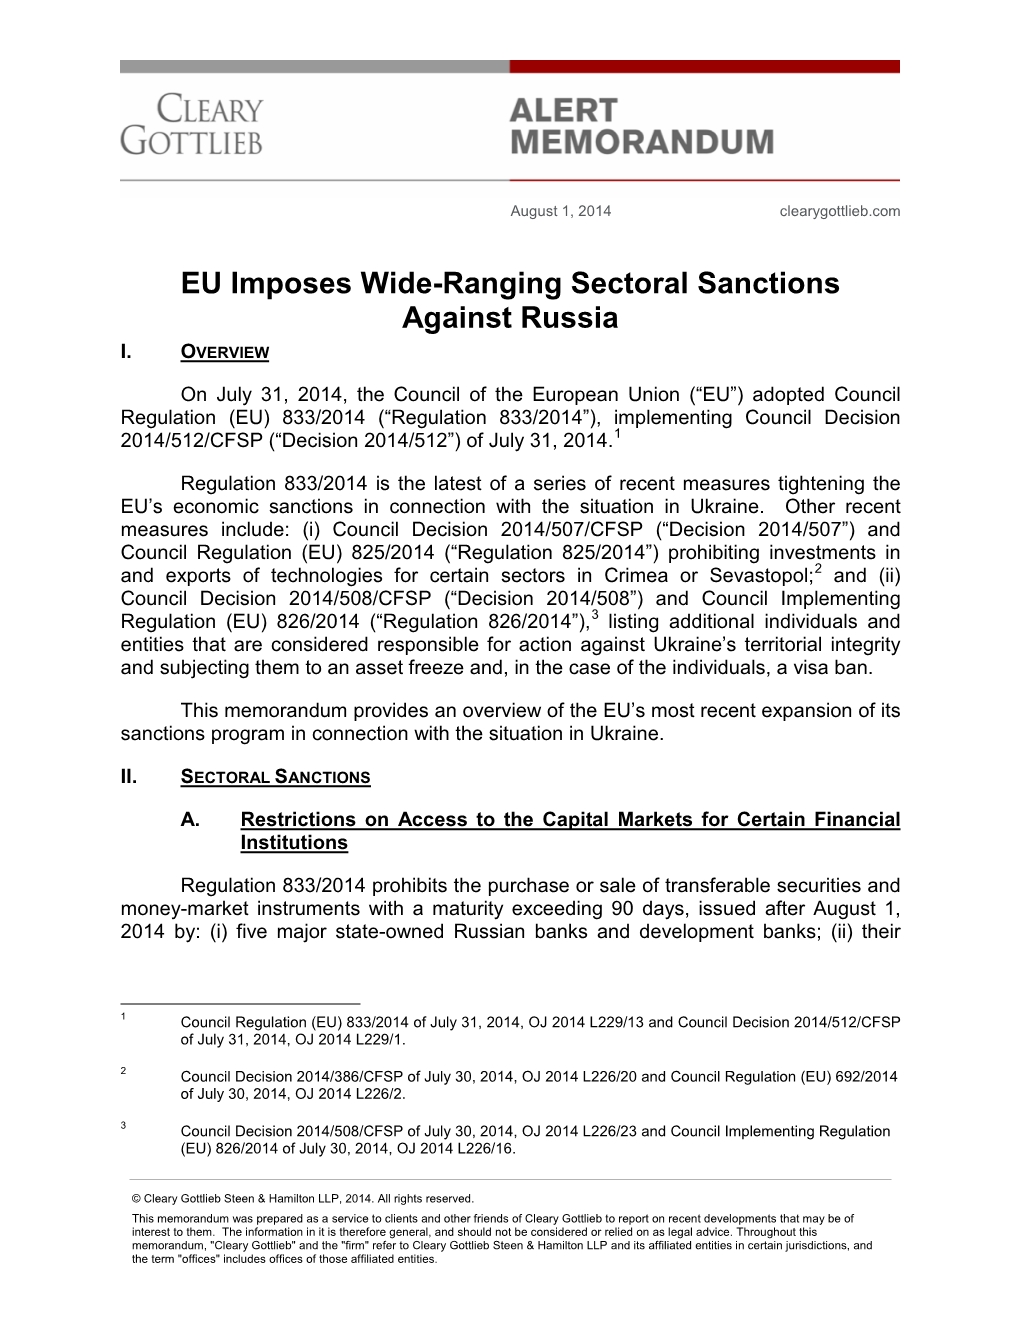 EU Imposes Wide Ranging Sectoral Sanctions Against Russia 2014